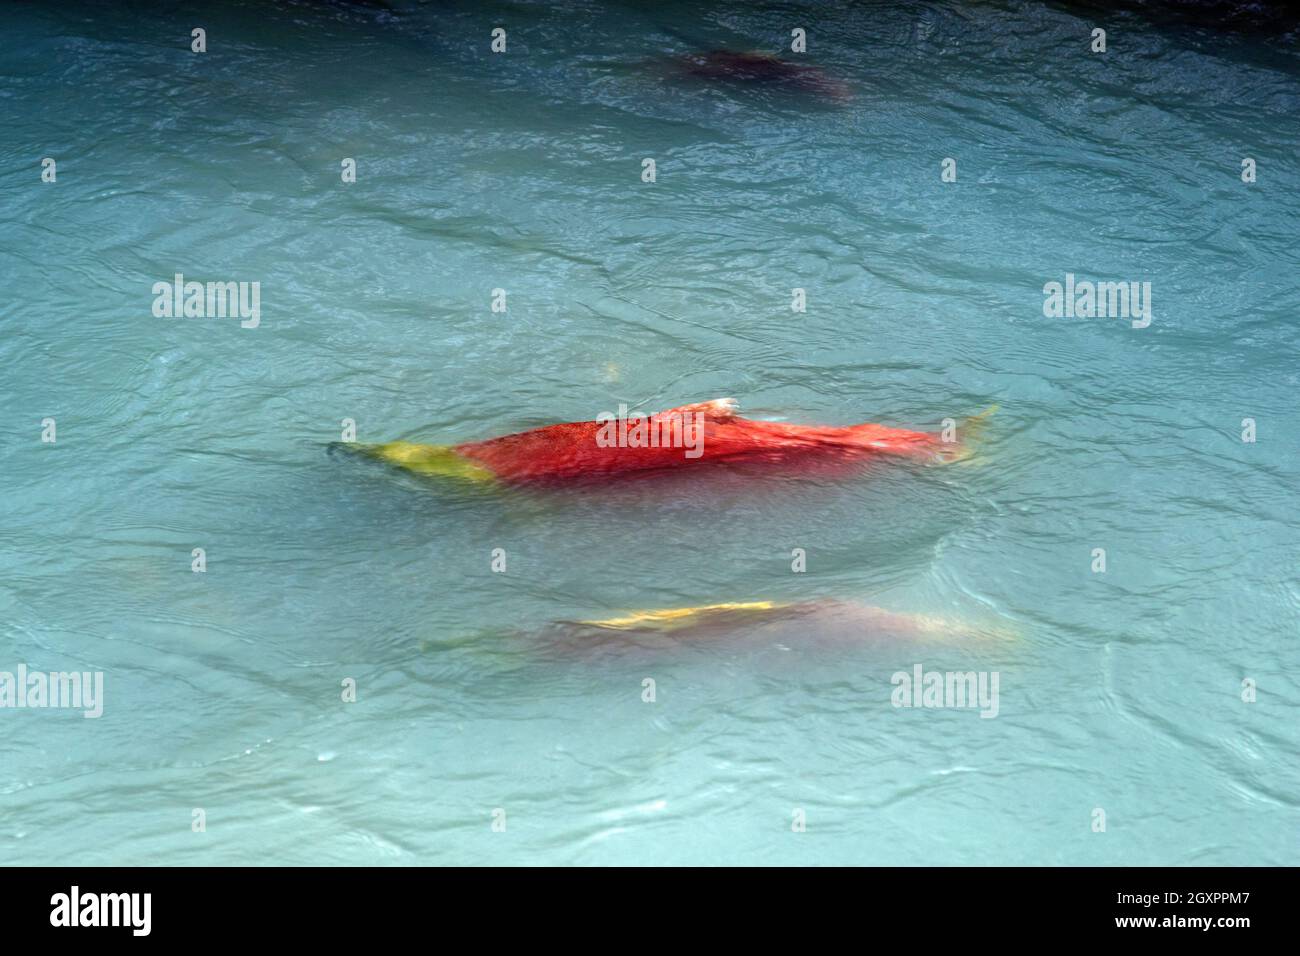 Red chinook salmons, Oncorhynchus tshawytscha, ready to spawn in the teal water of the Power Creek, Cordova, Alaska, USA Stock Photo